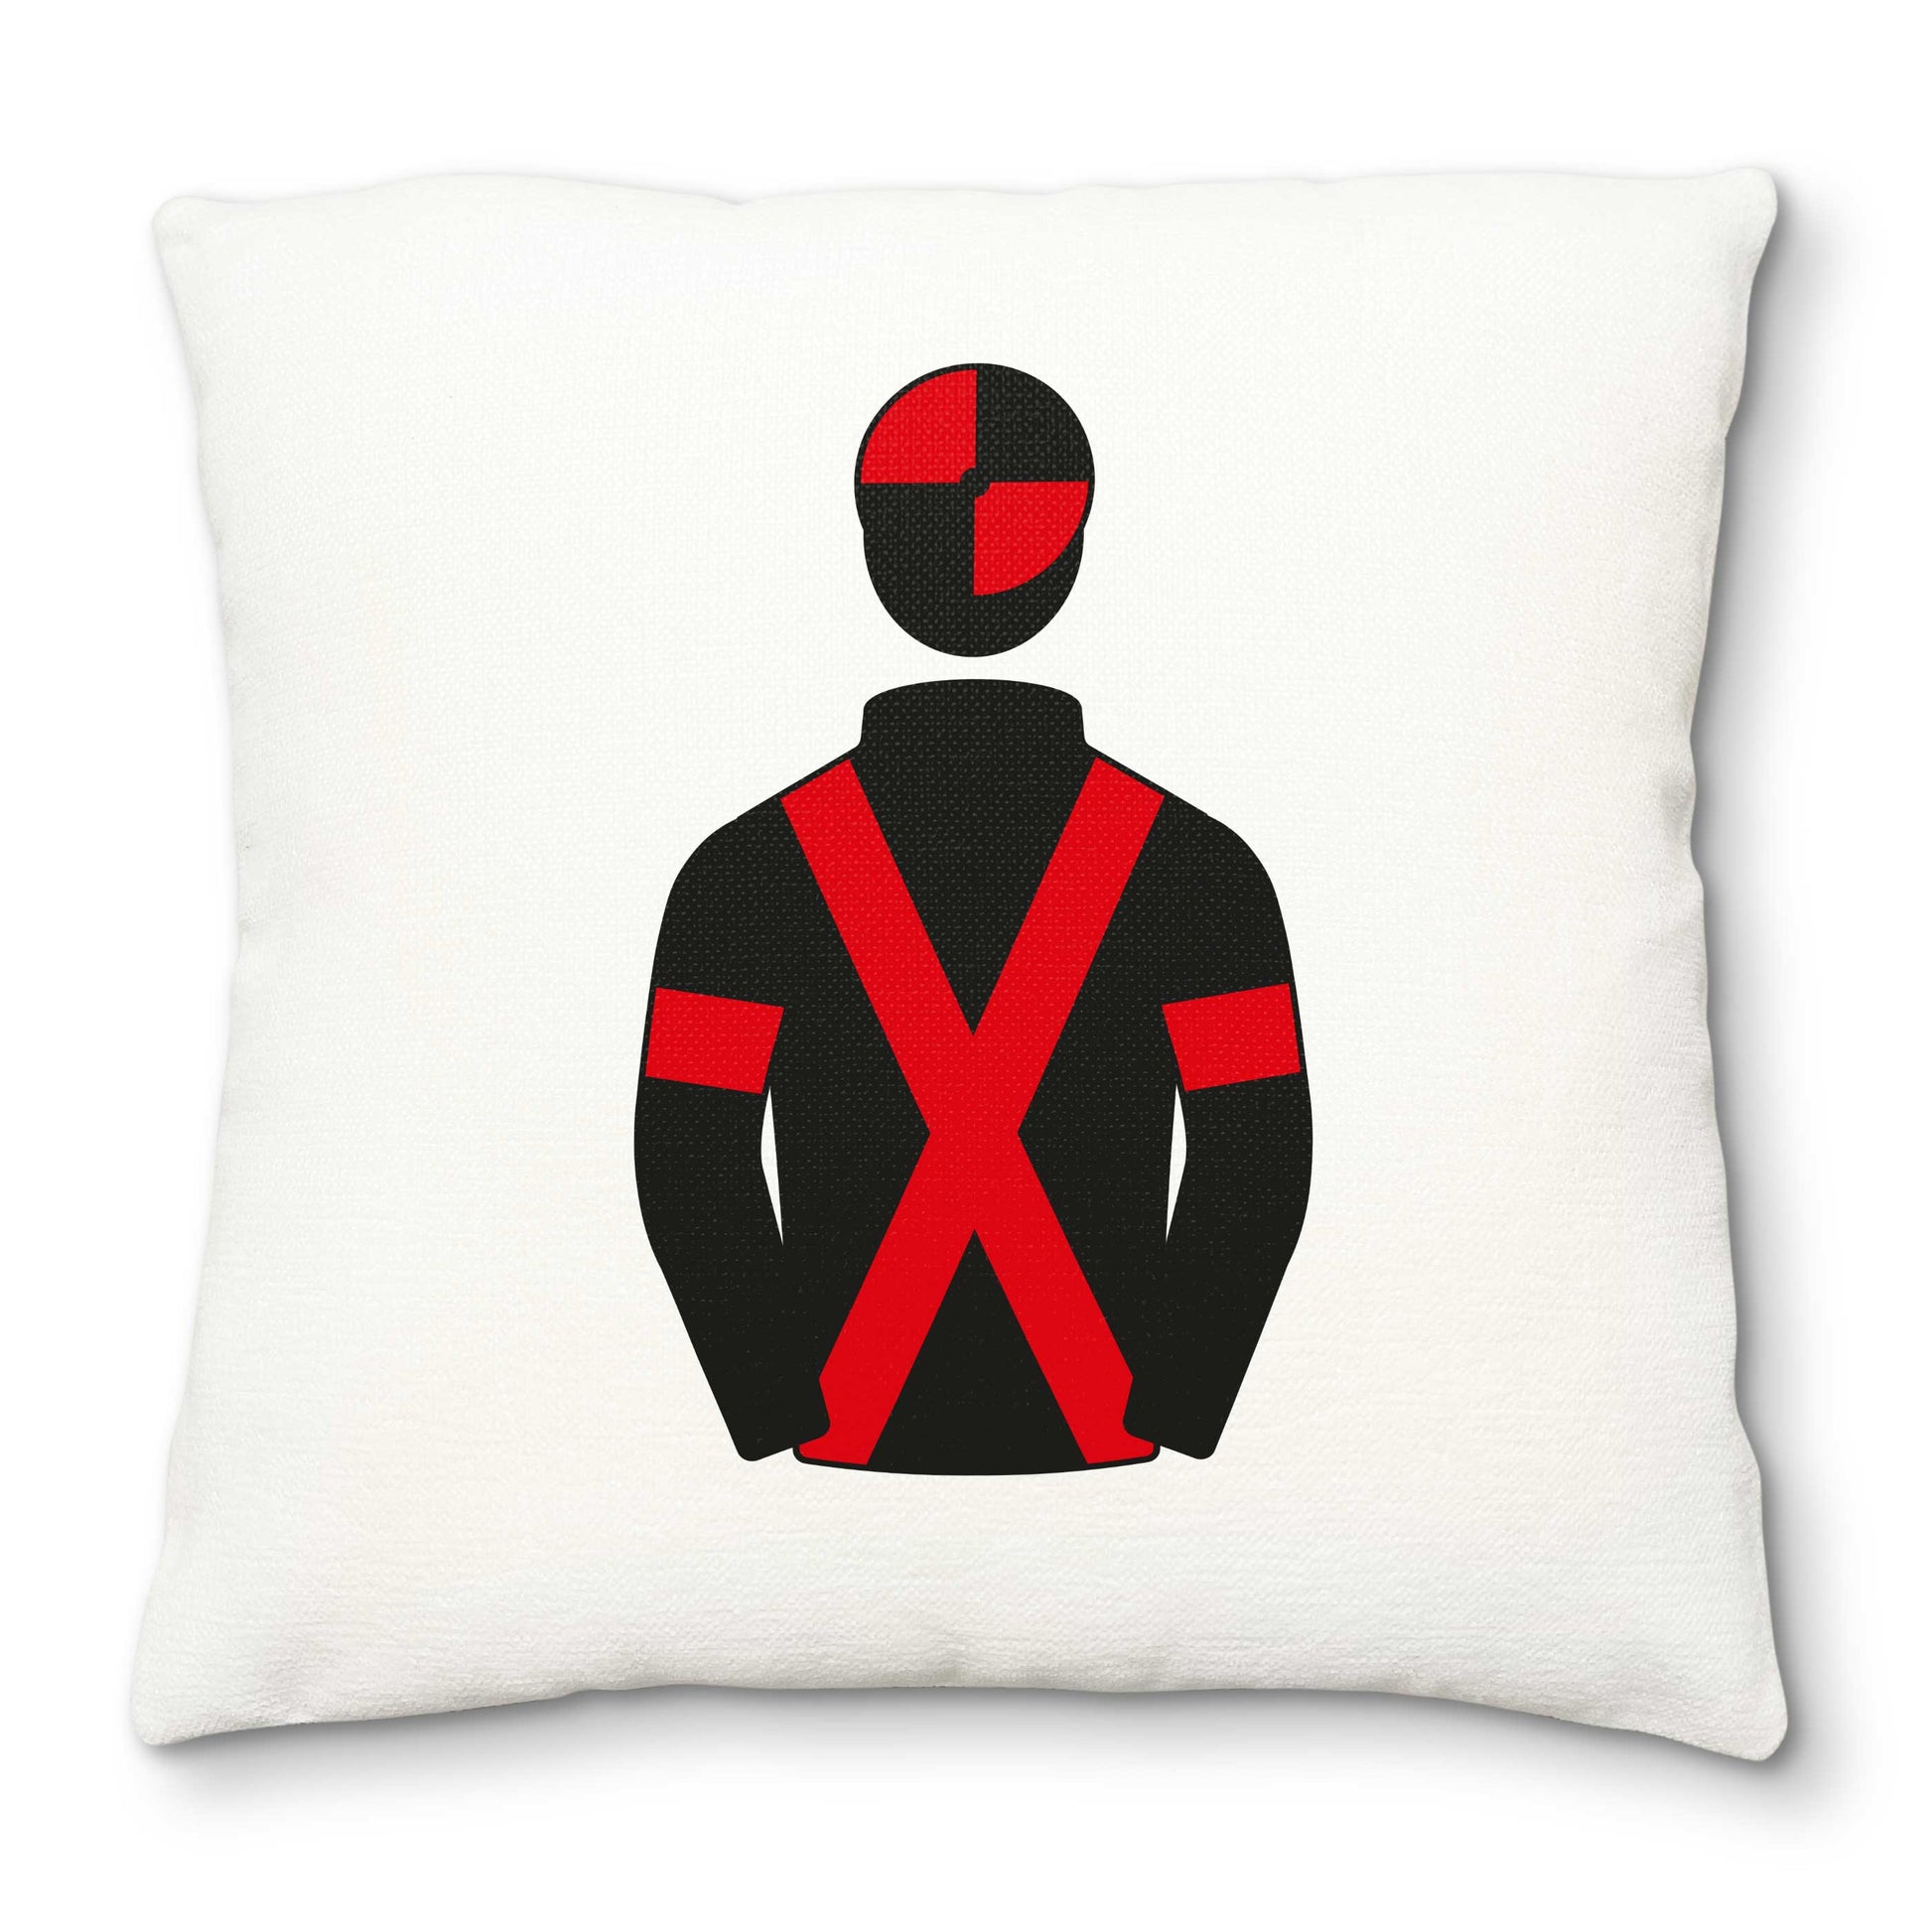 David Brace Deluxe Cushion Cover - Deluxe Cushion Cover - Hacked Up